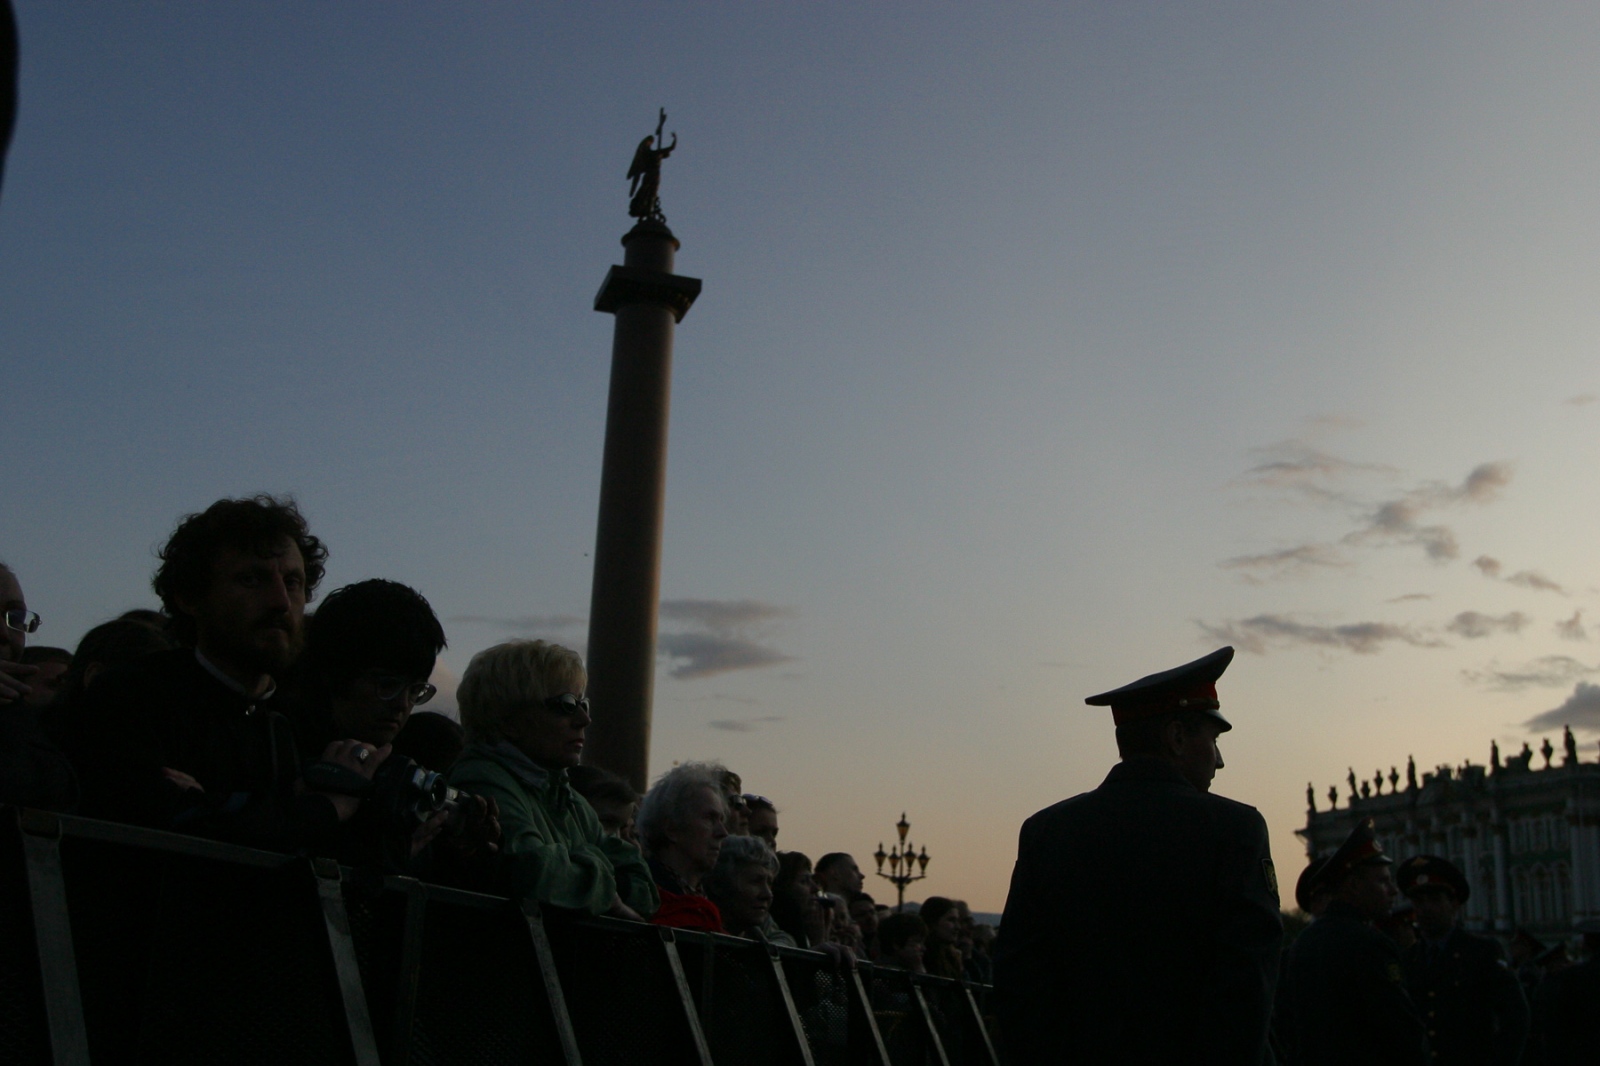 Russia - St. Petersburg Celebrates -                 At 10:30pm there is still daylight as the...